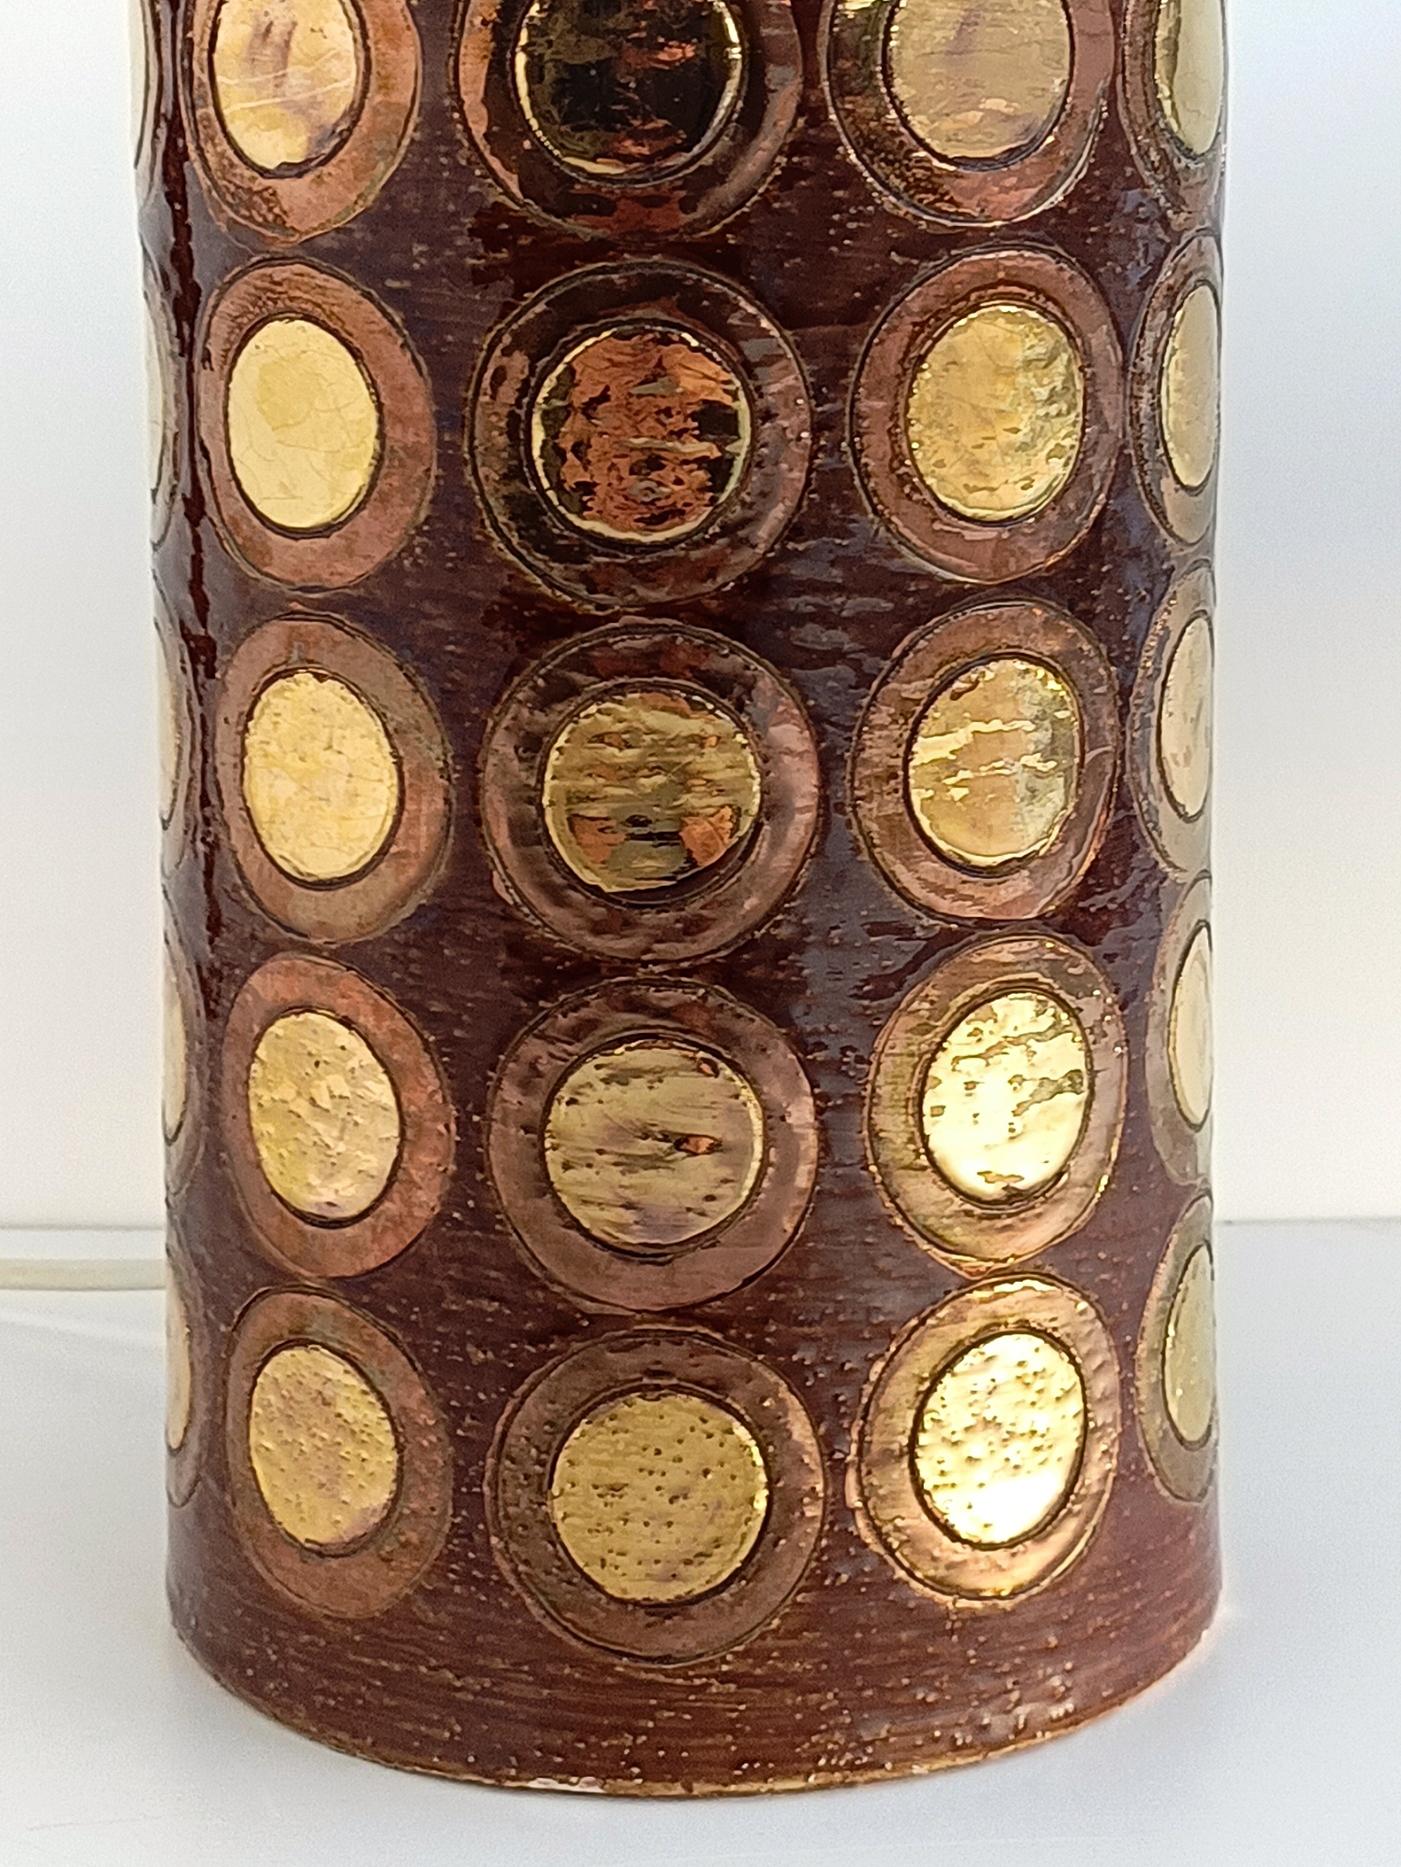 Exquisite Aldo Londi for Bitossi Ikano decor vintage ceramic lamp, featuring a gorgeous glazing in gold, cooper, and brown. 

The solid ceramic body of the lamp was sgraffito hand decorated and carefully glazed with these stunning and mesmerizing